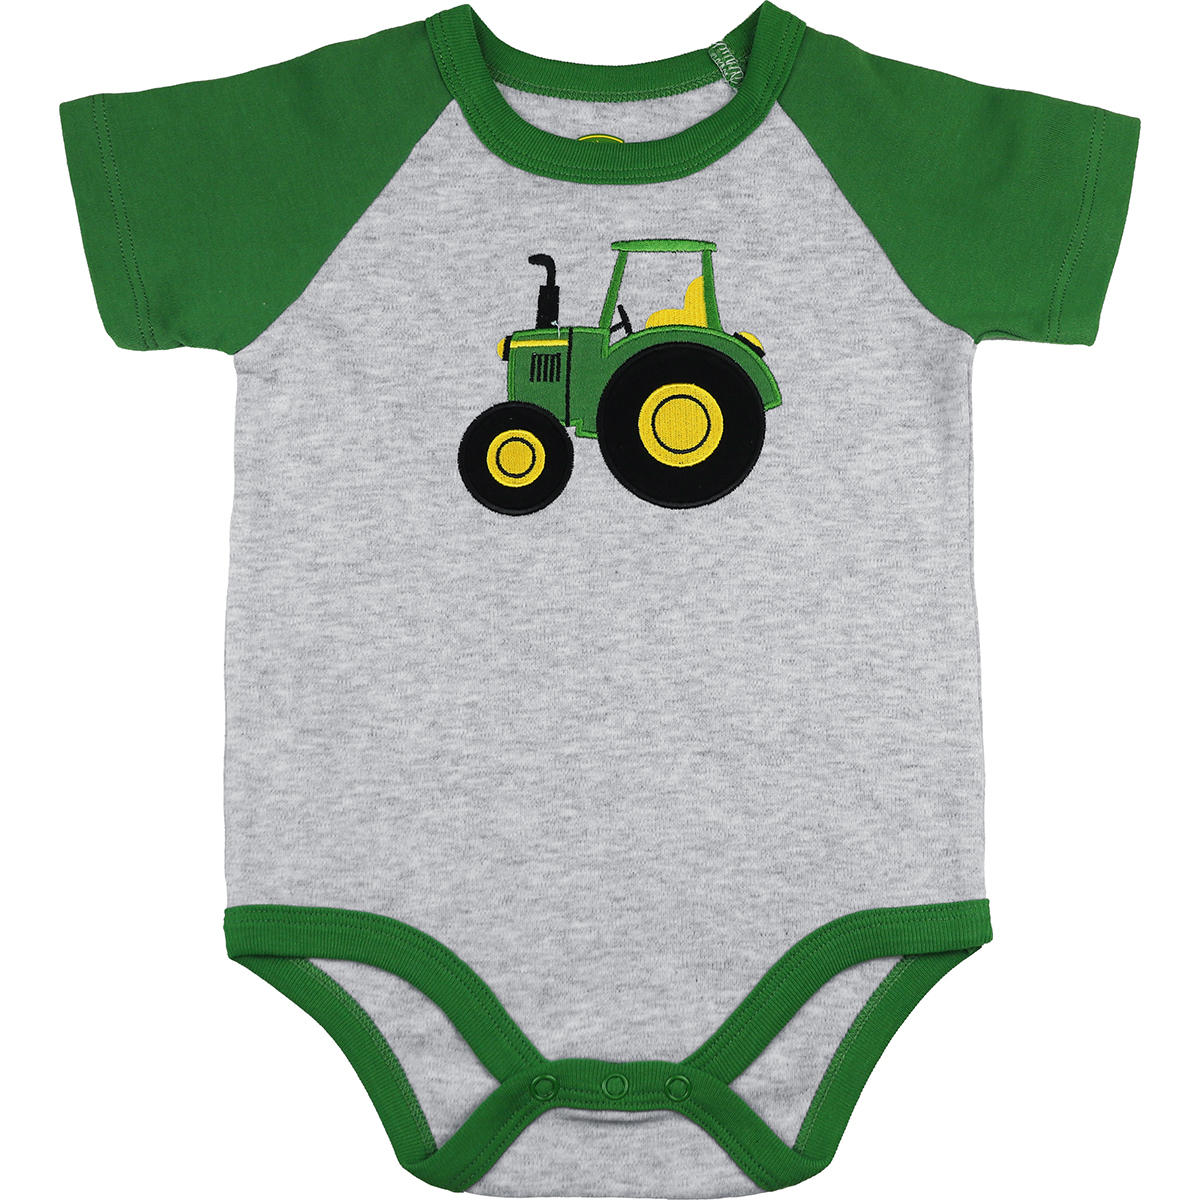 Embroidered Tractor Bodyshirt